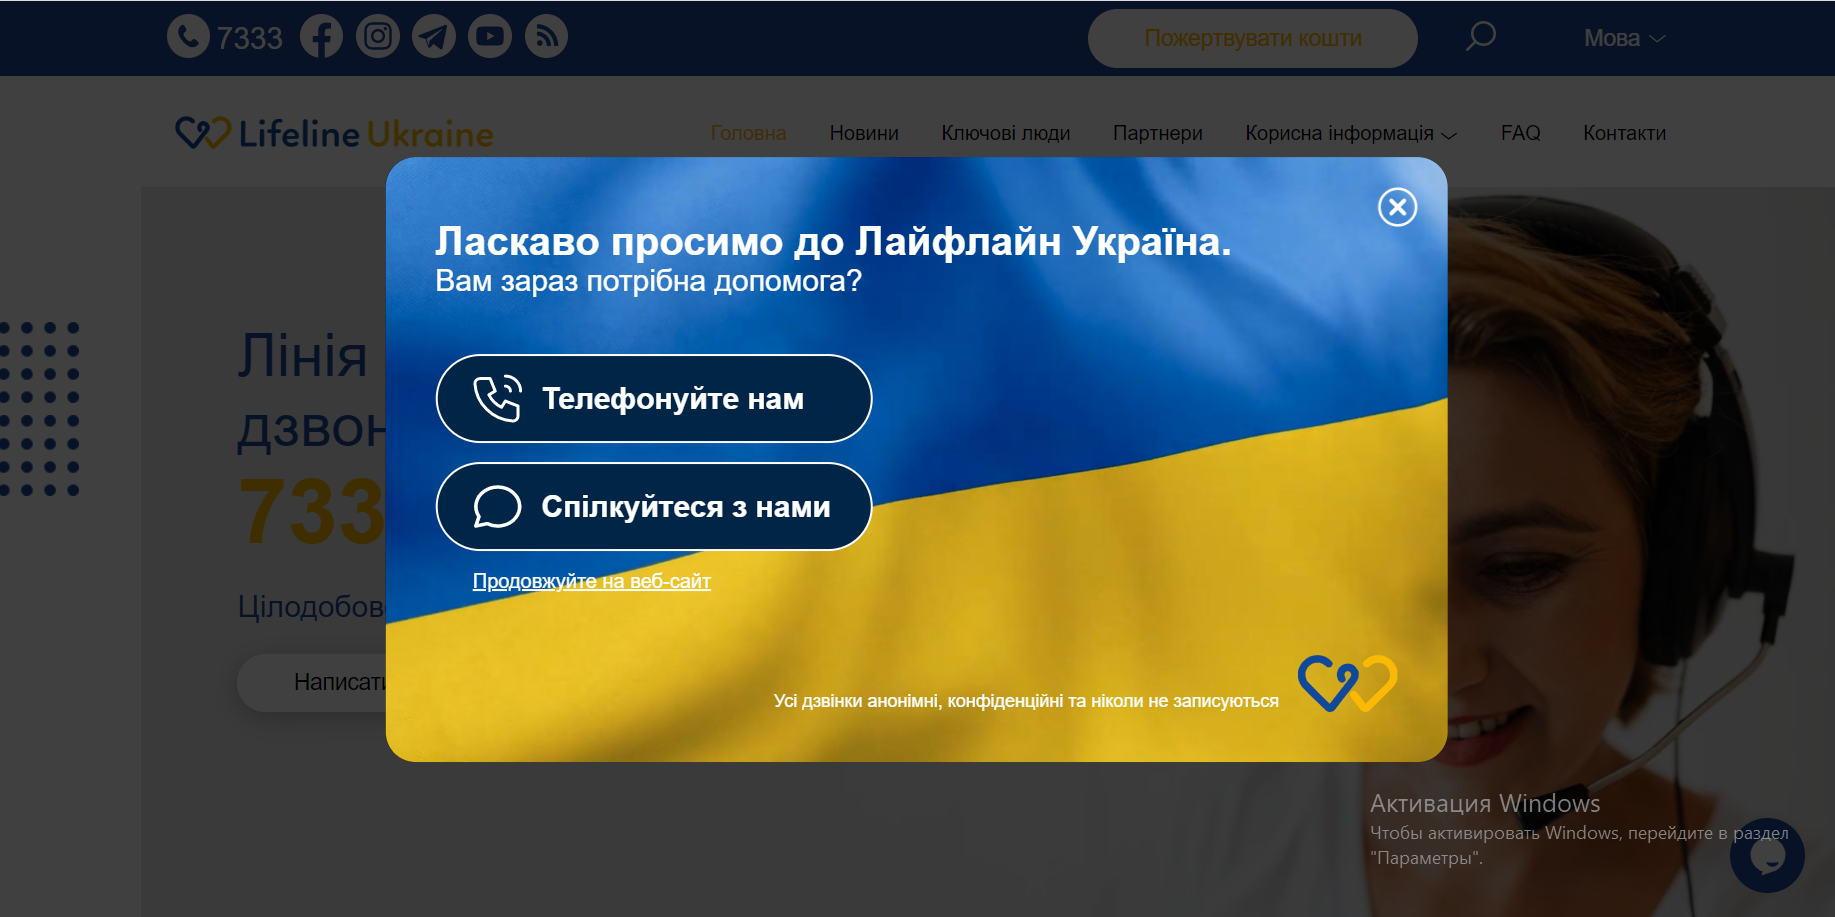 Lifeline Ukraine has both call and chat options available for those reaching out methods for help in Ukraine.